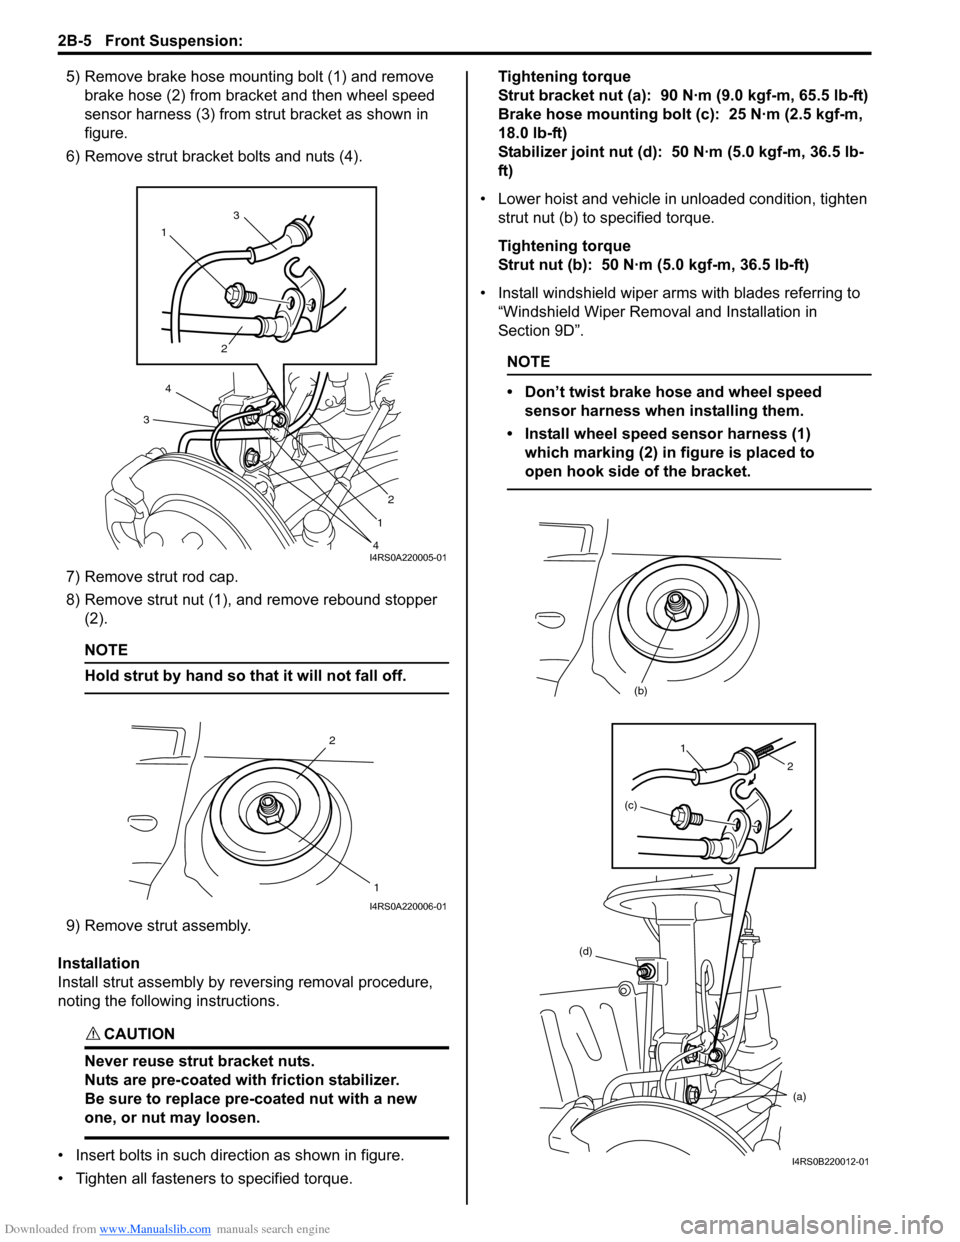 SUZUKI SWIFT 2006 2.G Service User Guide Downloaded from www.Manualslib.com manuals search engine 2B-5 Front Suspension: 
5) Remove brake hose mounting bolt (1) and remove brake hose (2) from bracket and then wheel speed 
sensor harness (3) 